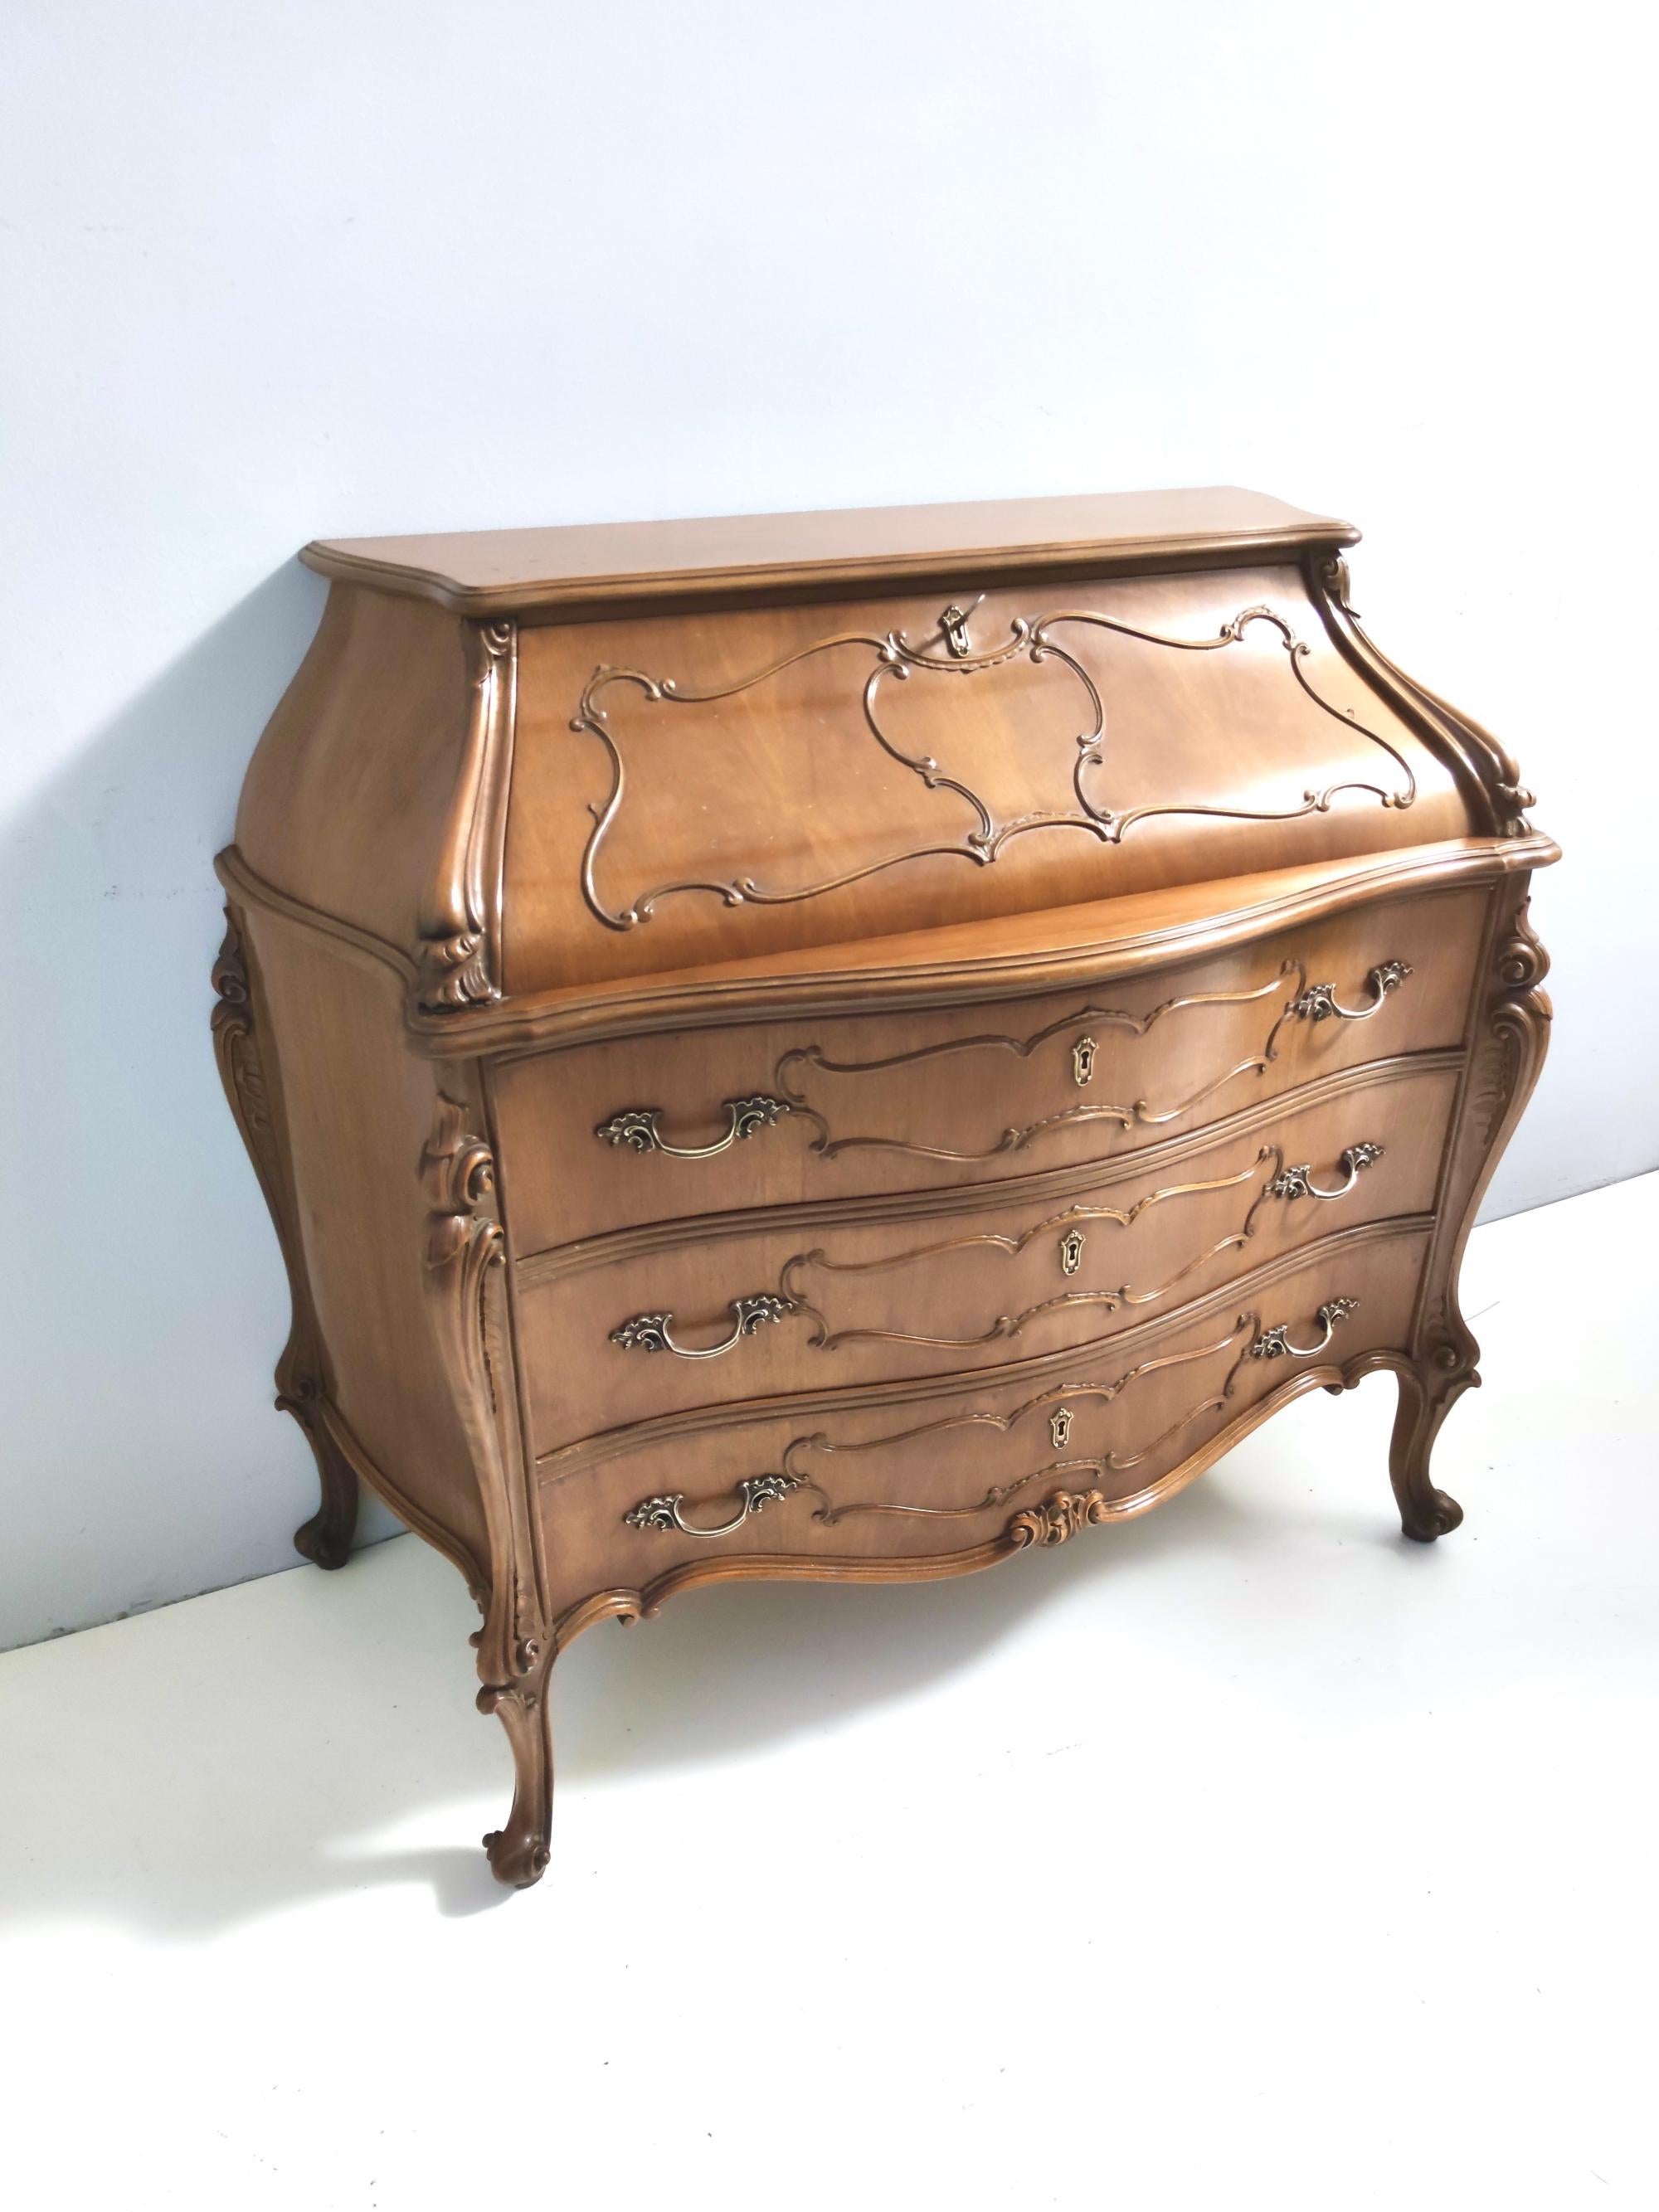 Baroque Revival Vintage Baroque Solid Walnut Dresser with Inlaid Designs, Italy For Sale